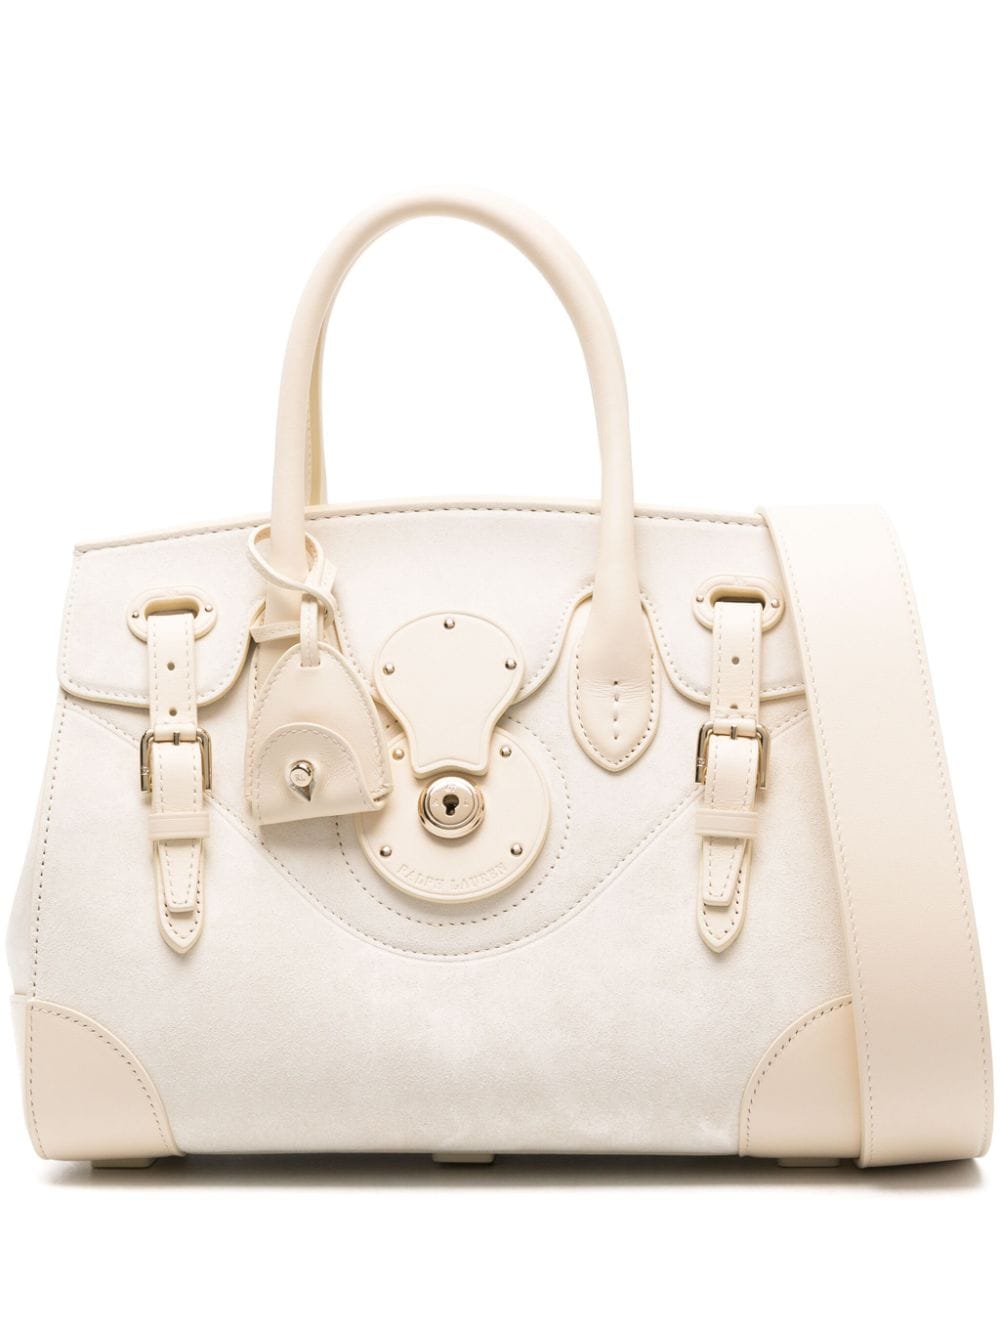 Ralph Lauren Ricky Suede Tote Bag In White